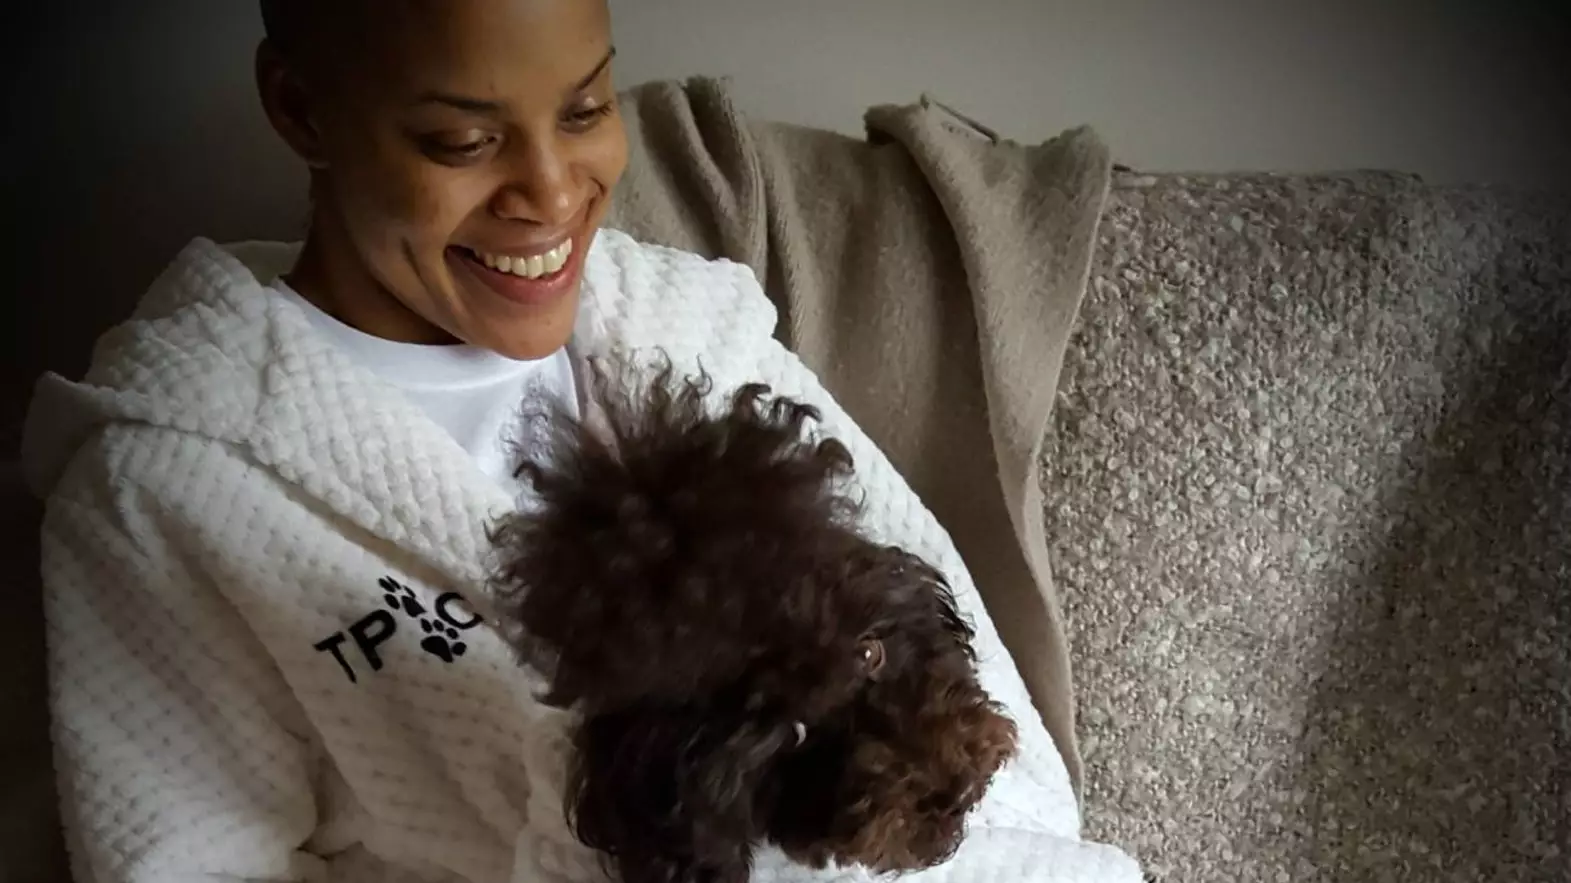 You Can Now Get Matching Bathrobes For You And Your Dog